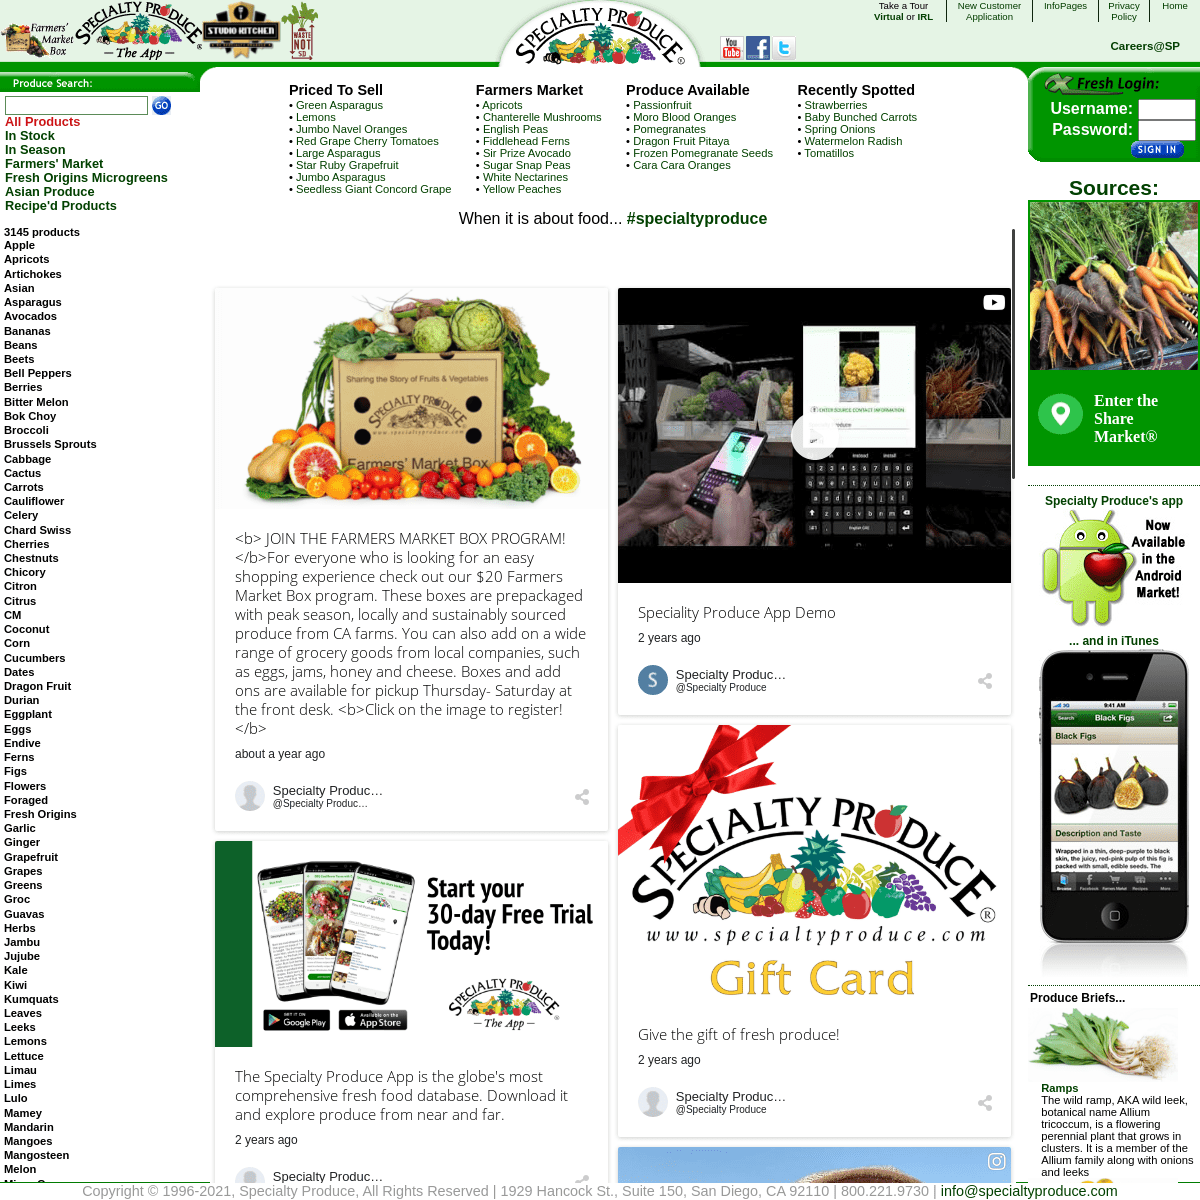 A complete backup of https://specialtyproduce.com